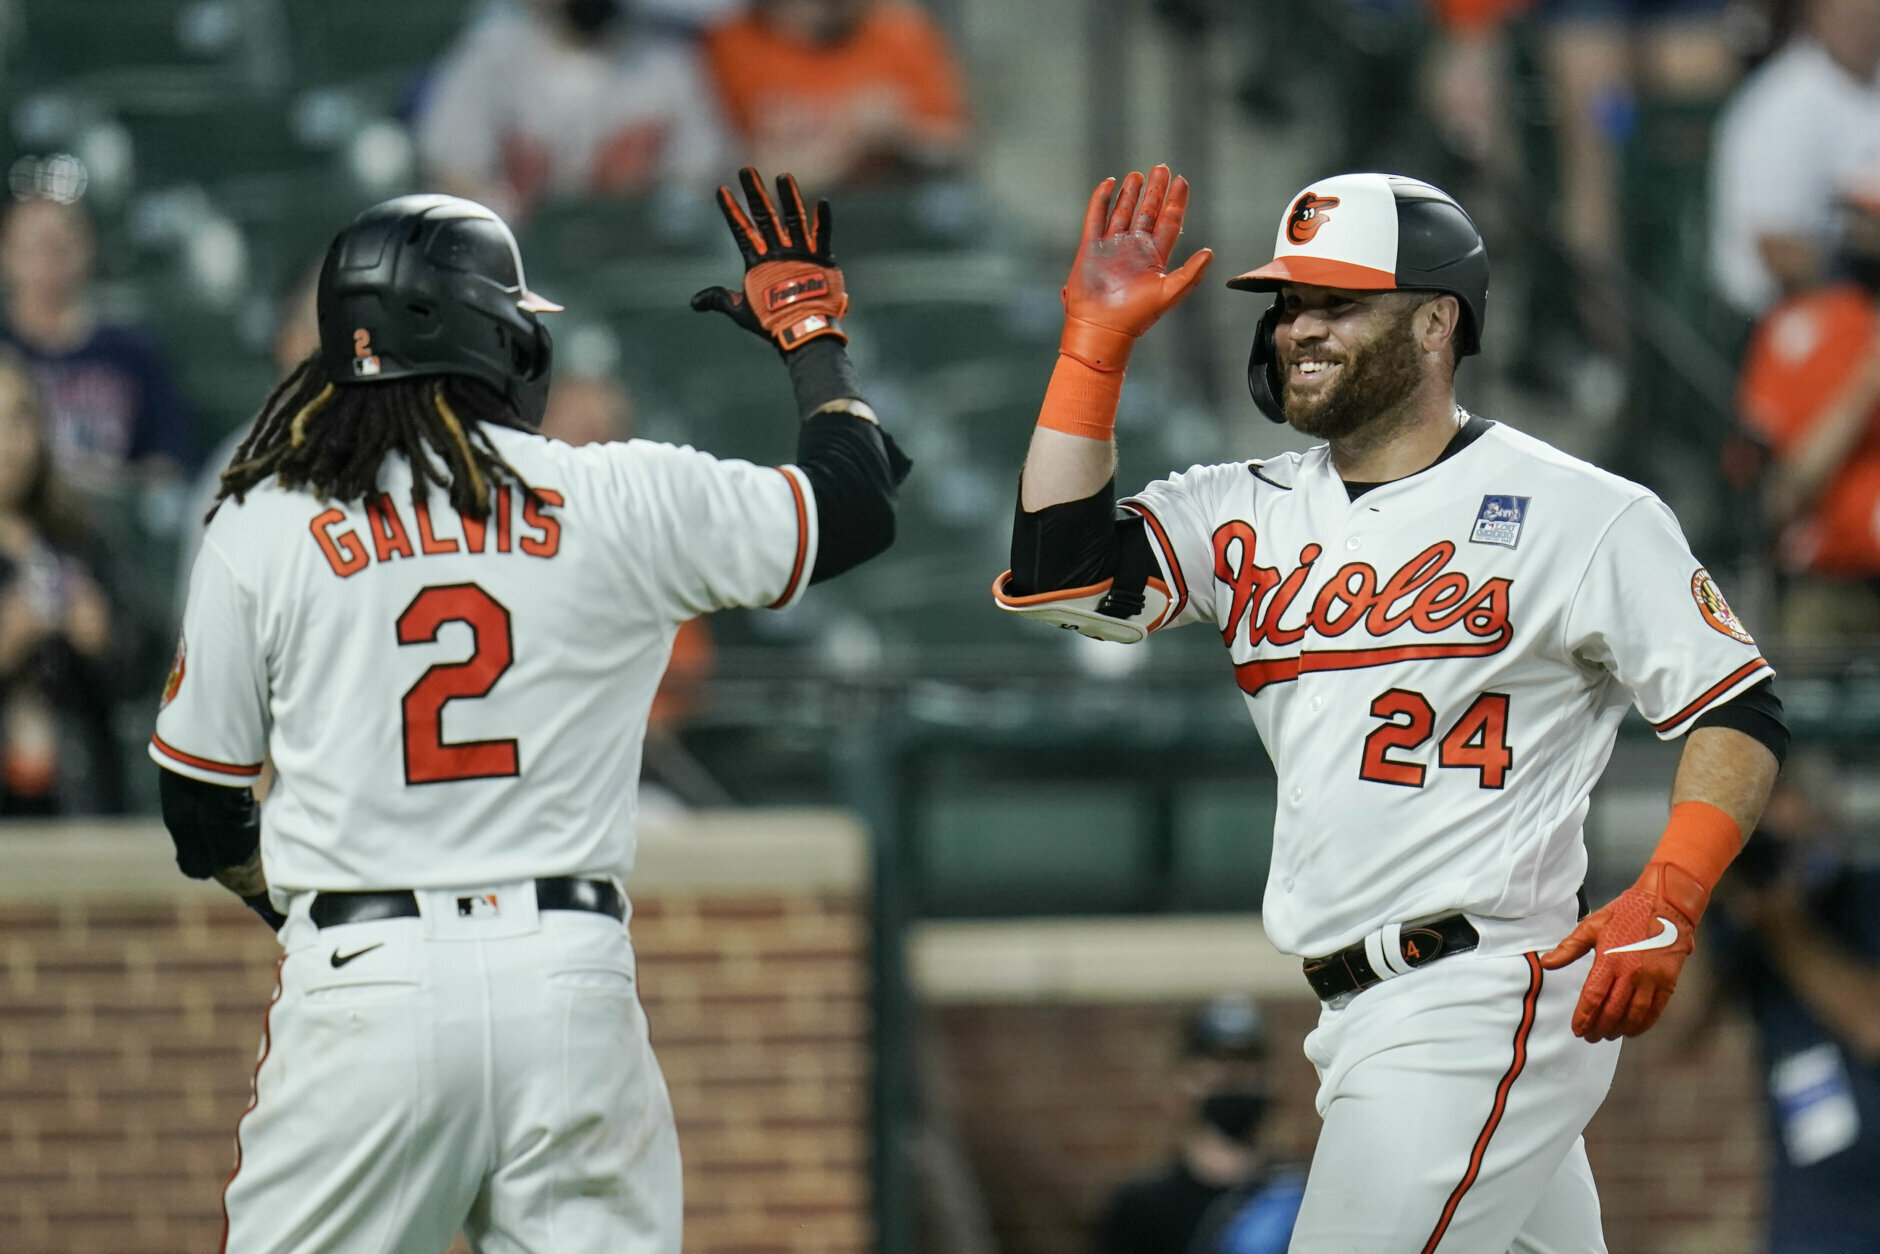 Baltimore Orioles' DJ Stewart (24) is greeted near home plate by Freddy Galvis (2) after Stewart scored both of them on a two-run home run against Minnesota Twins starting pitcher Randy Dobnak during the fifth inning of a baseball game, Wednesday, June 2, 2021, in Baltimore. (AP Photo/Julio Cortez)